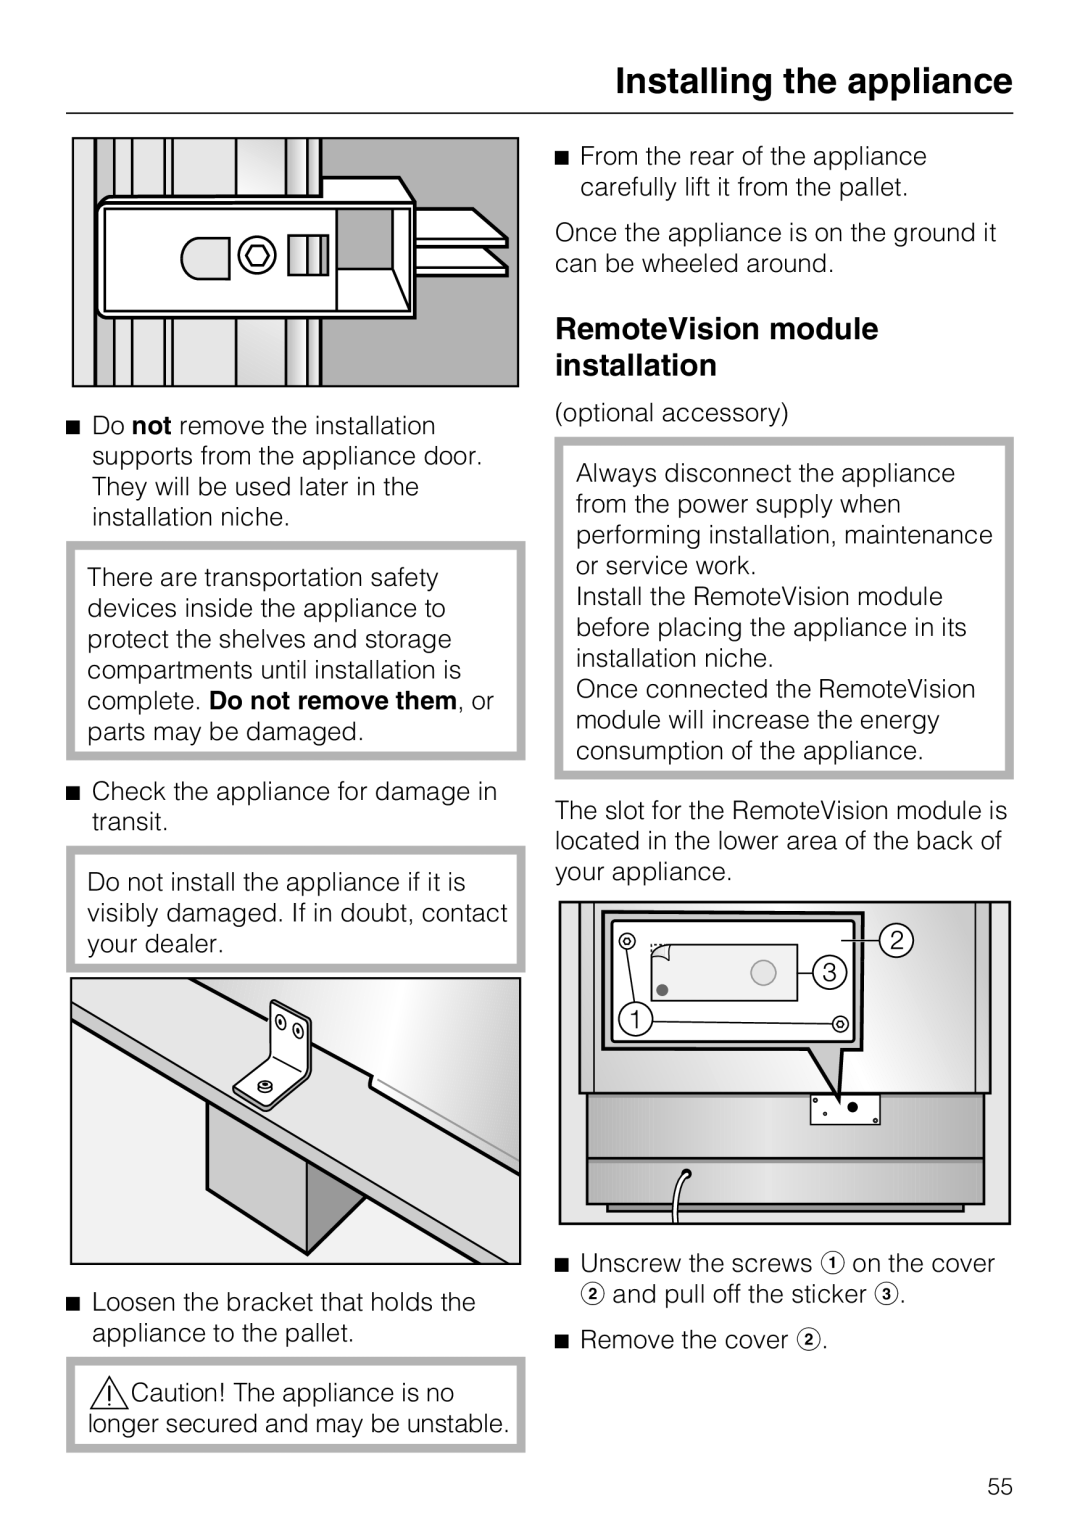 Miele F 1411 Vi installation instructions RemoteVision module installation, Installing the appliance 